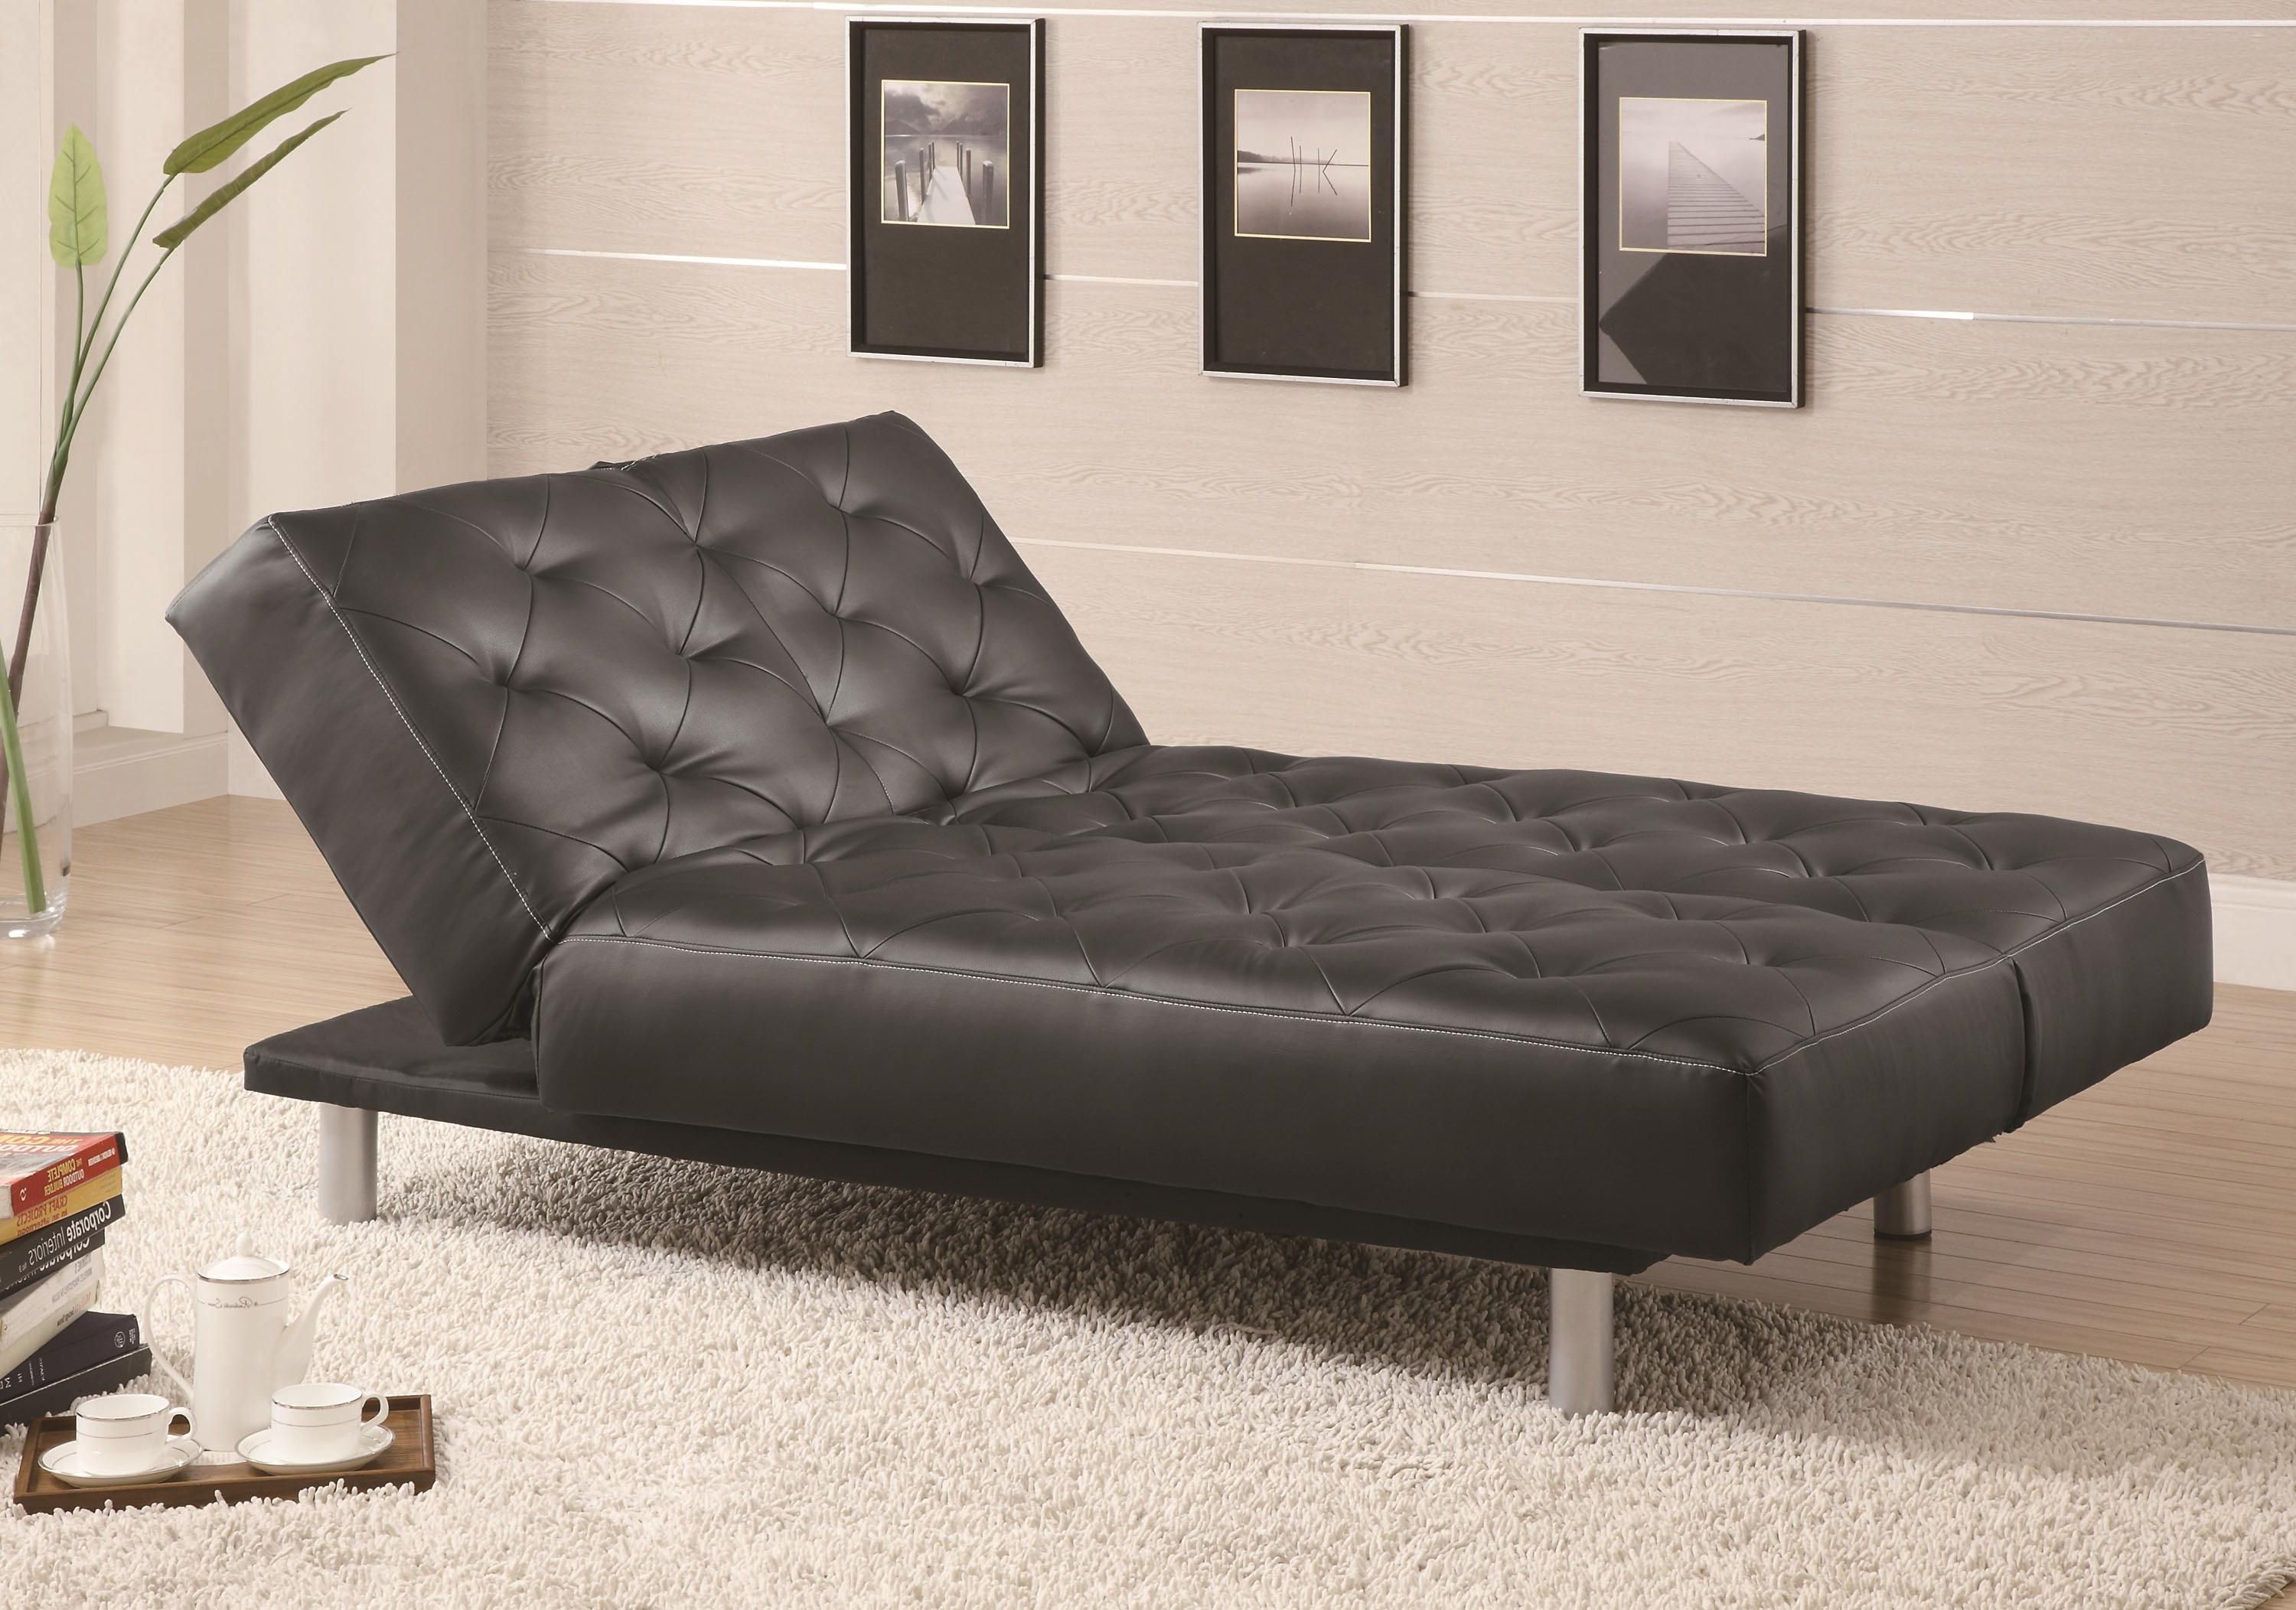 Chaise Beds Pertaining To Latest Coaster Sofa Beds And Futons Black Vinyl Tufted Sofa Bed/oversize (View 12 of 15)